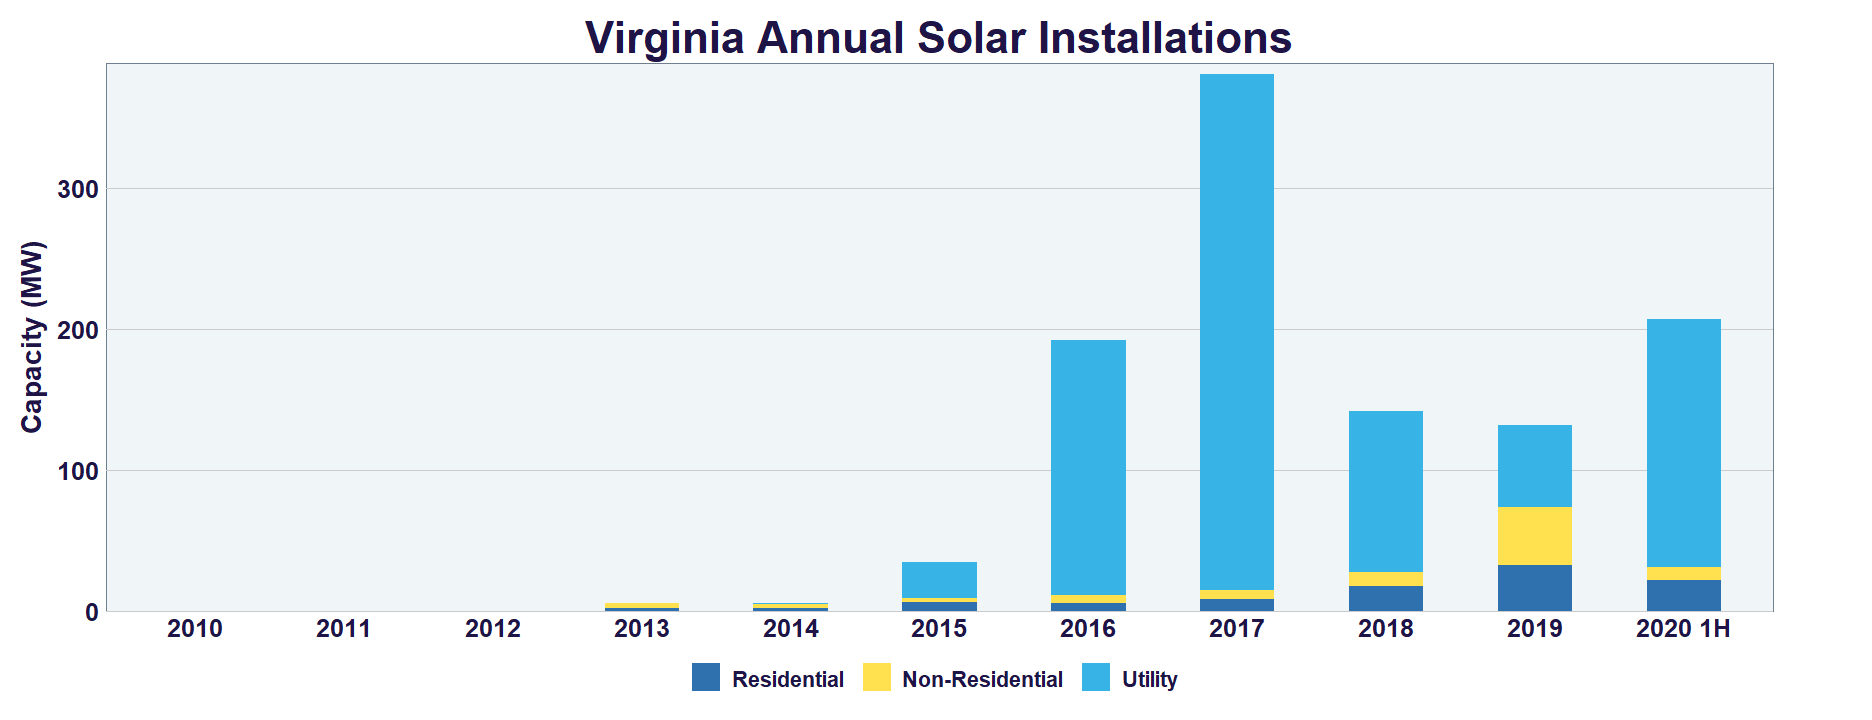 Solar Systems Increase Property Value Photovoltaic System Lbnl Solar System Property Values Resale Va In 2020 Photovoltaic System Solar Panels Solar Energy System